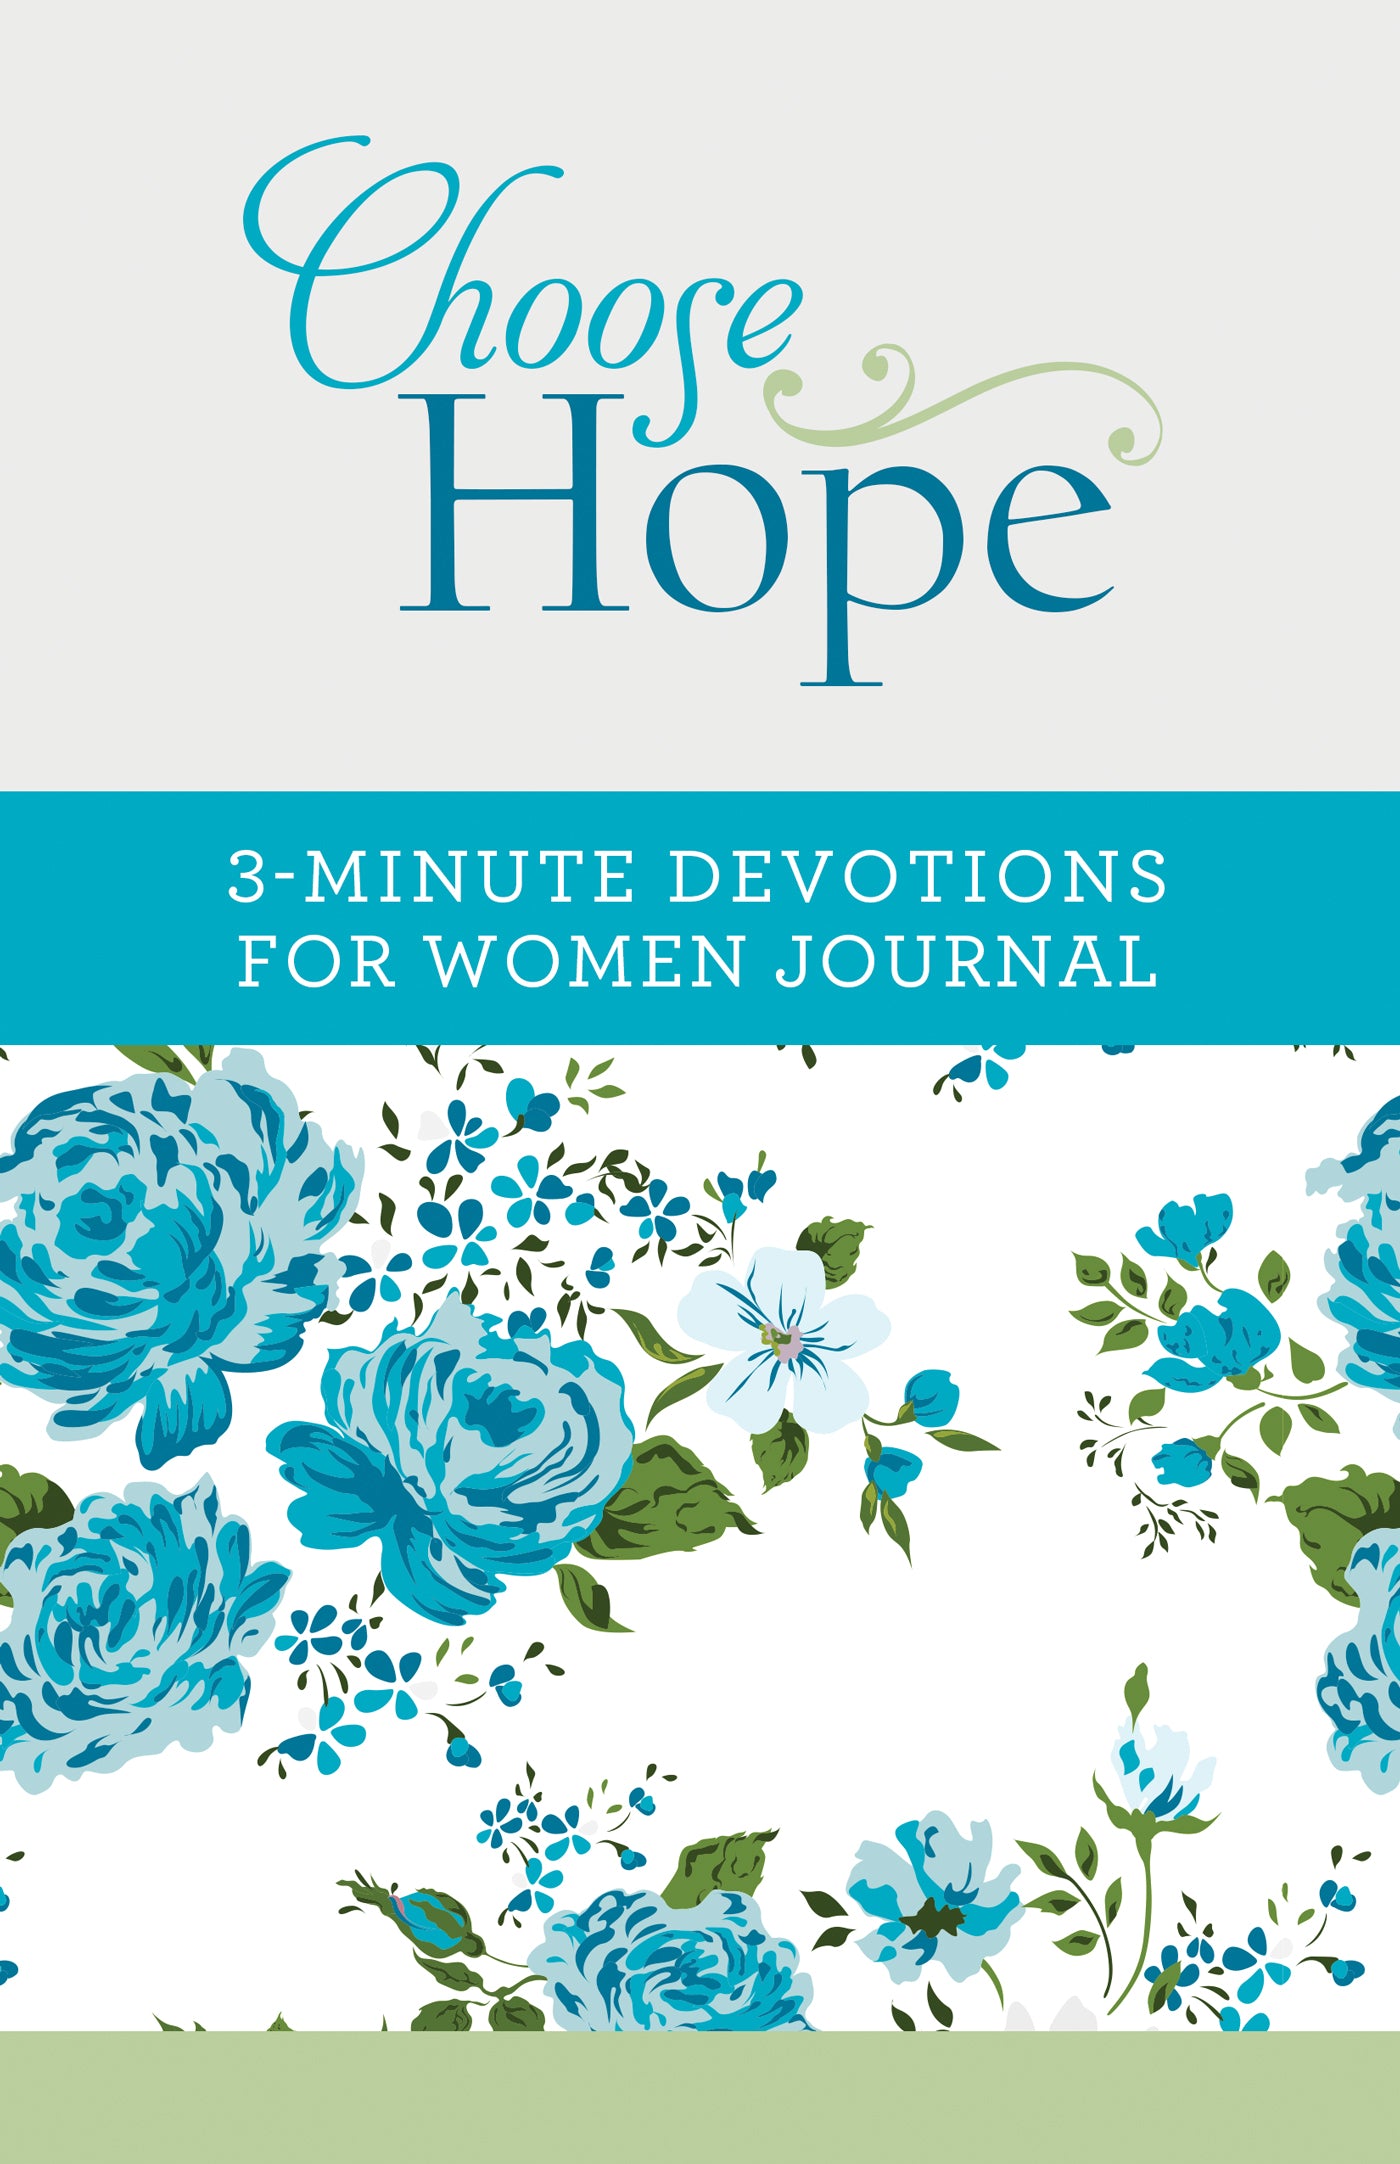 Choose Hope: 3-Minute Devotions for Women Journal - The Christian Gift Company